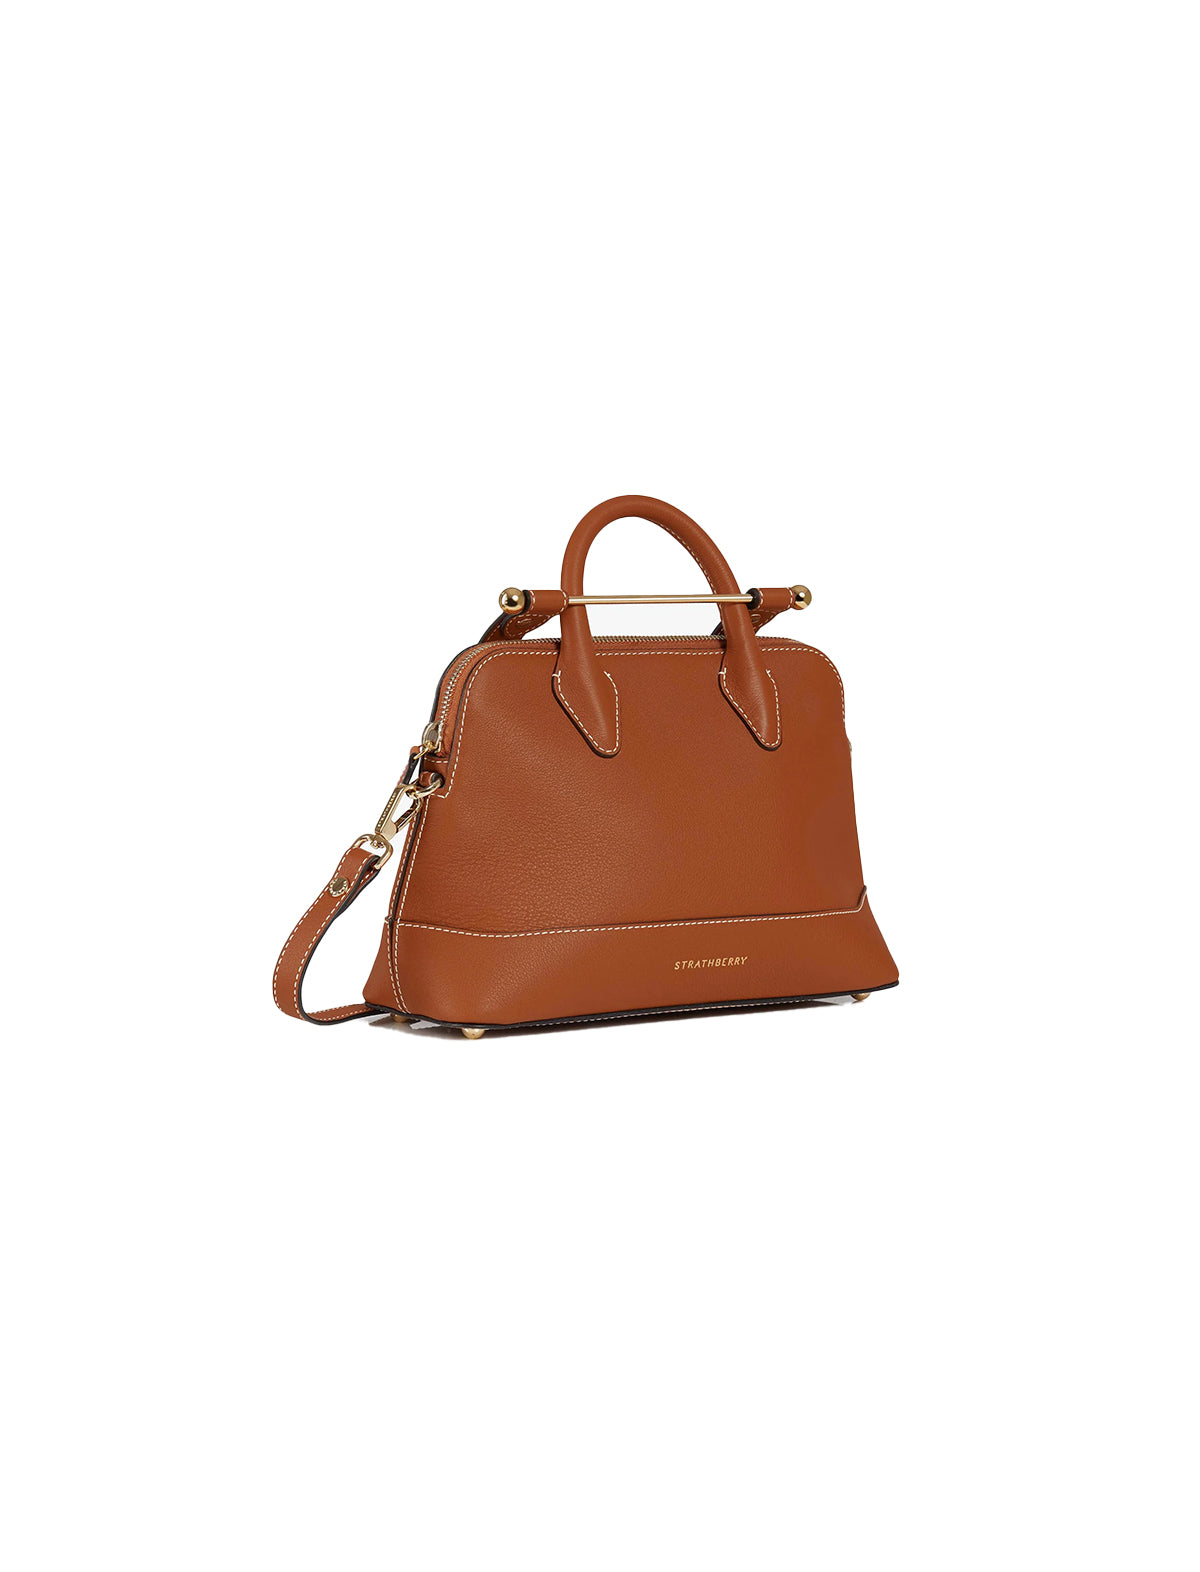 Strathberry Women's Midi Leather Tote - Chestnut One-Size